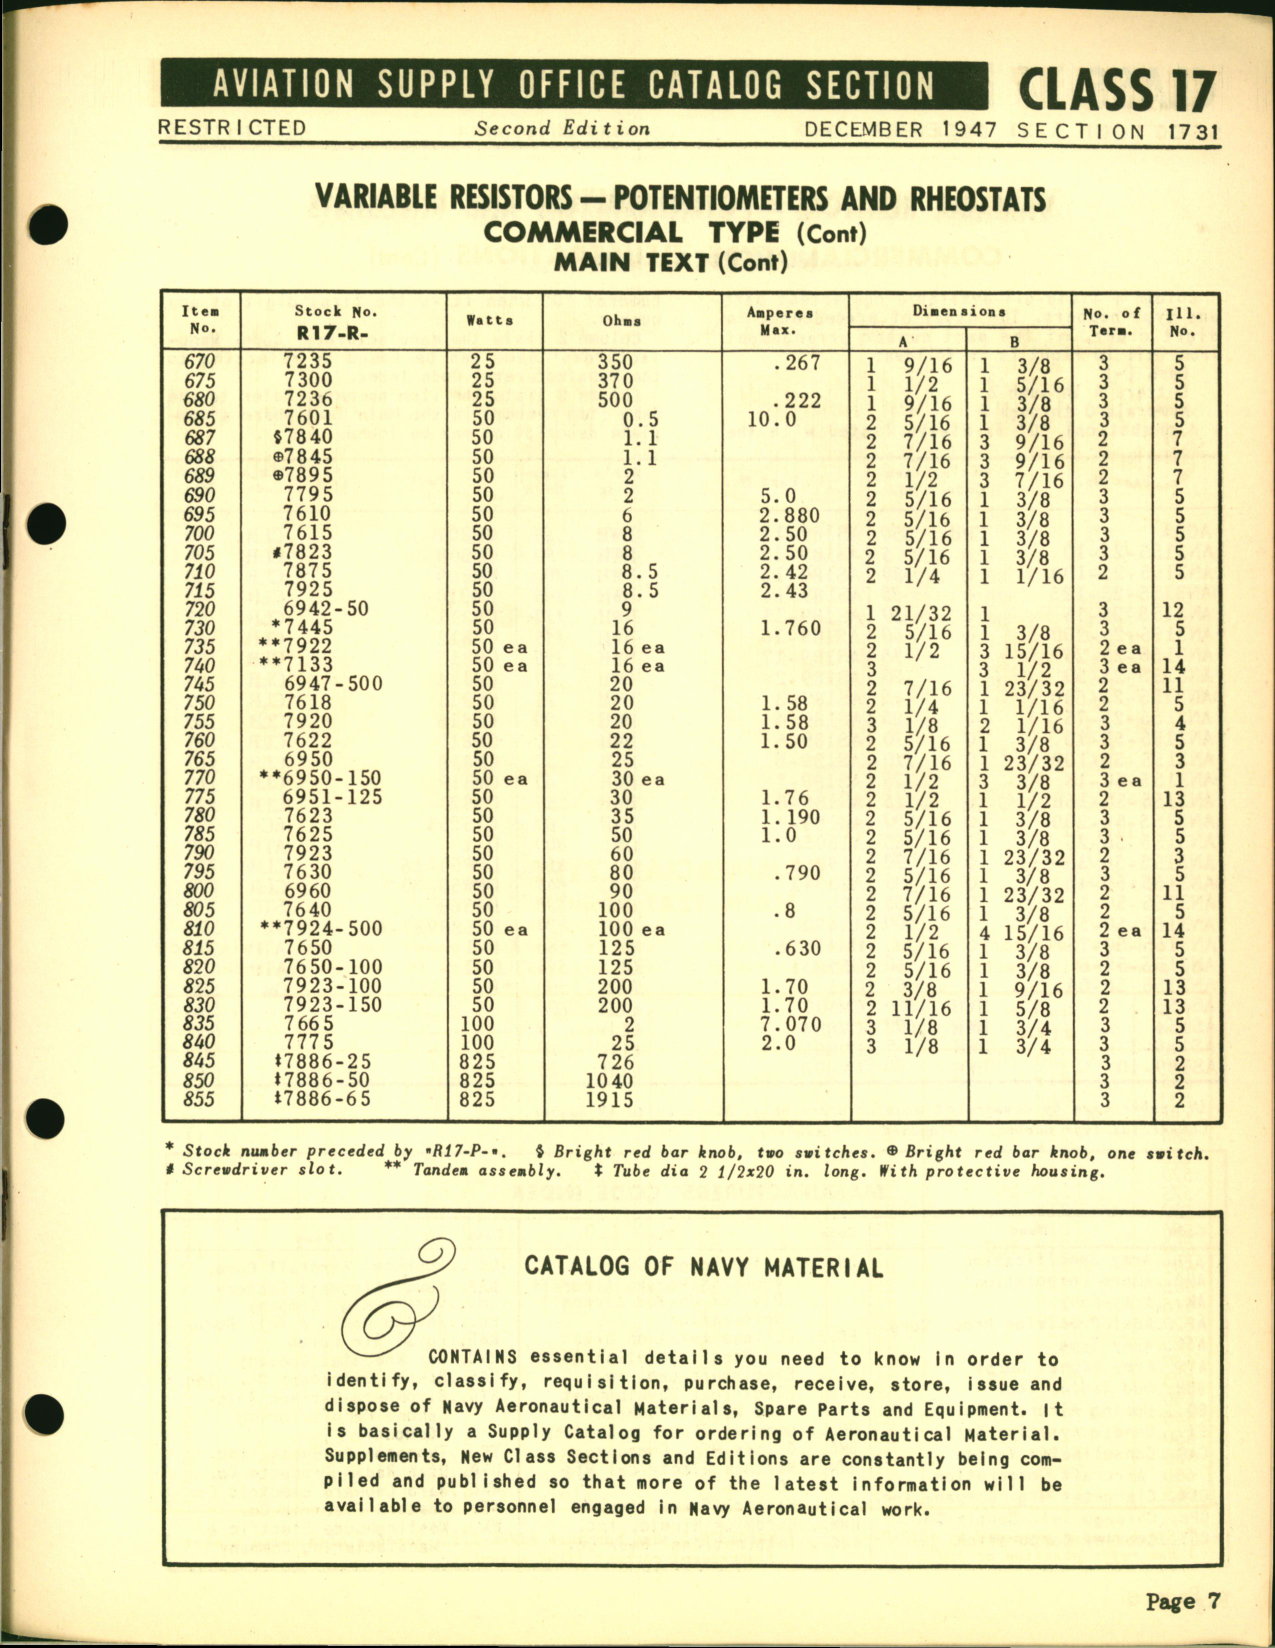 Sample page 7 from AirCorps Library document: Variable Resistors for Potentiometers and Rheostats